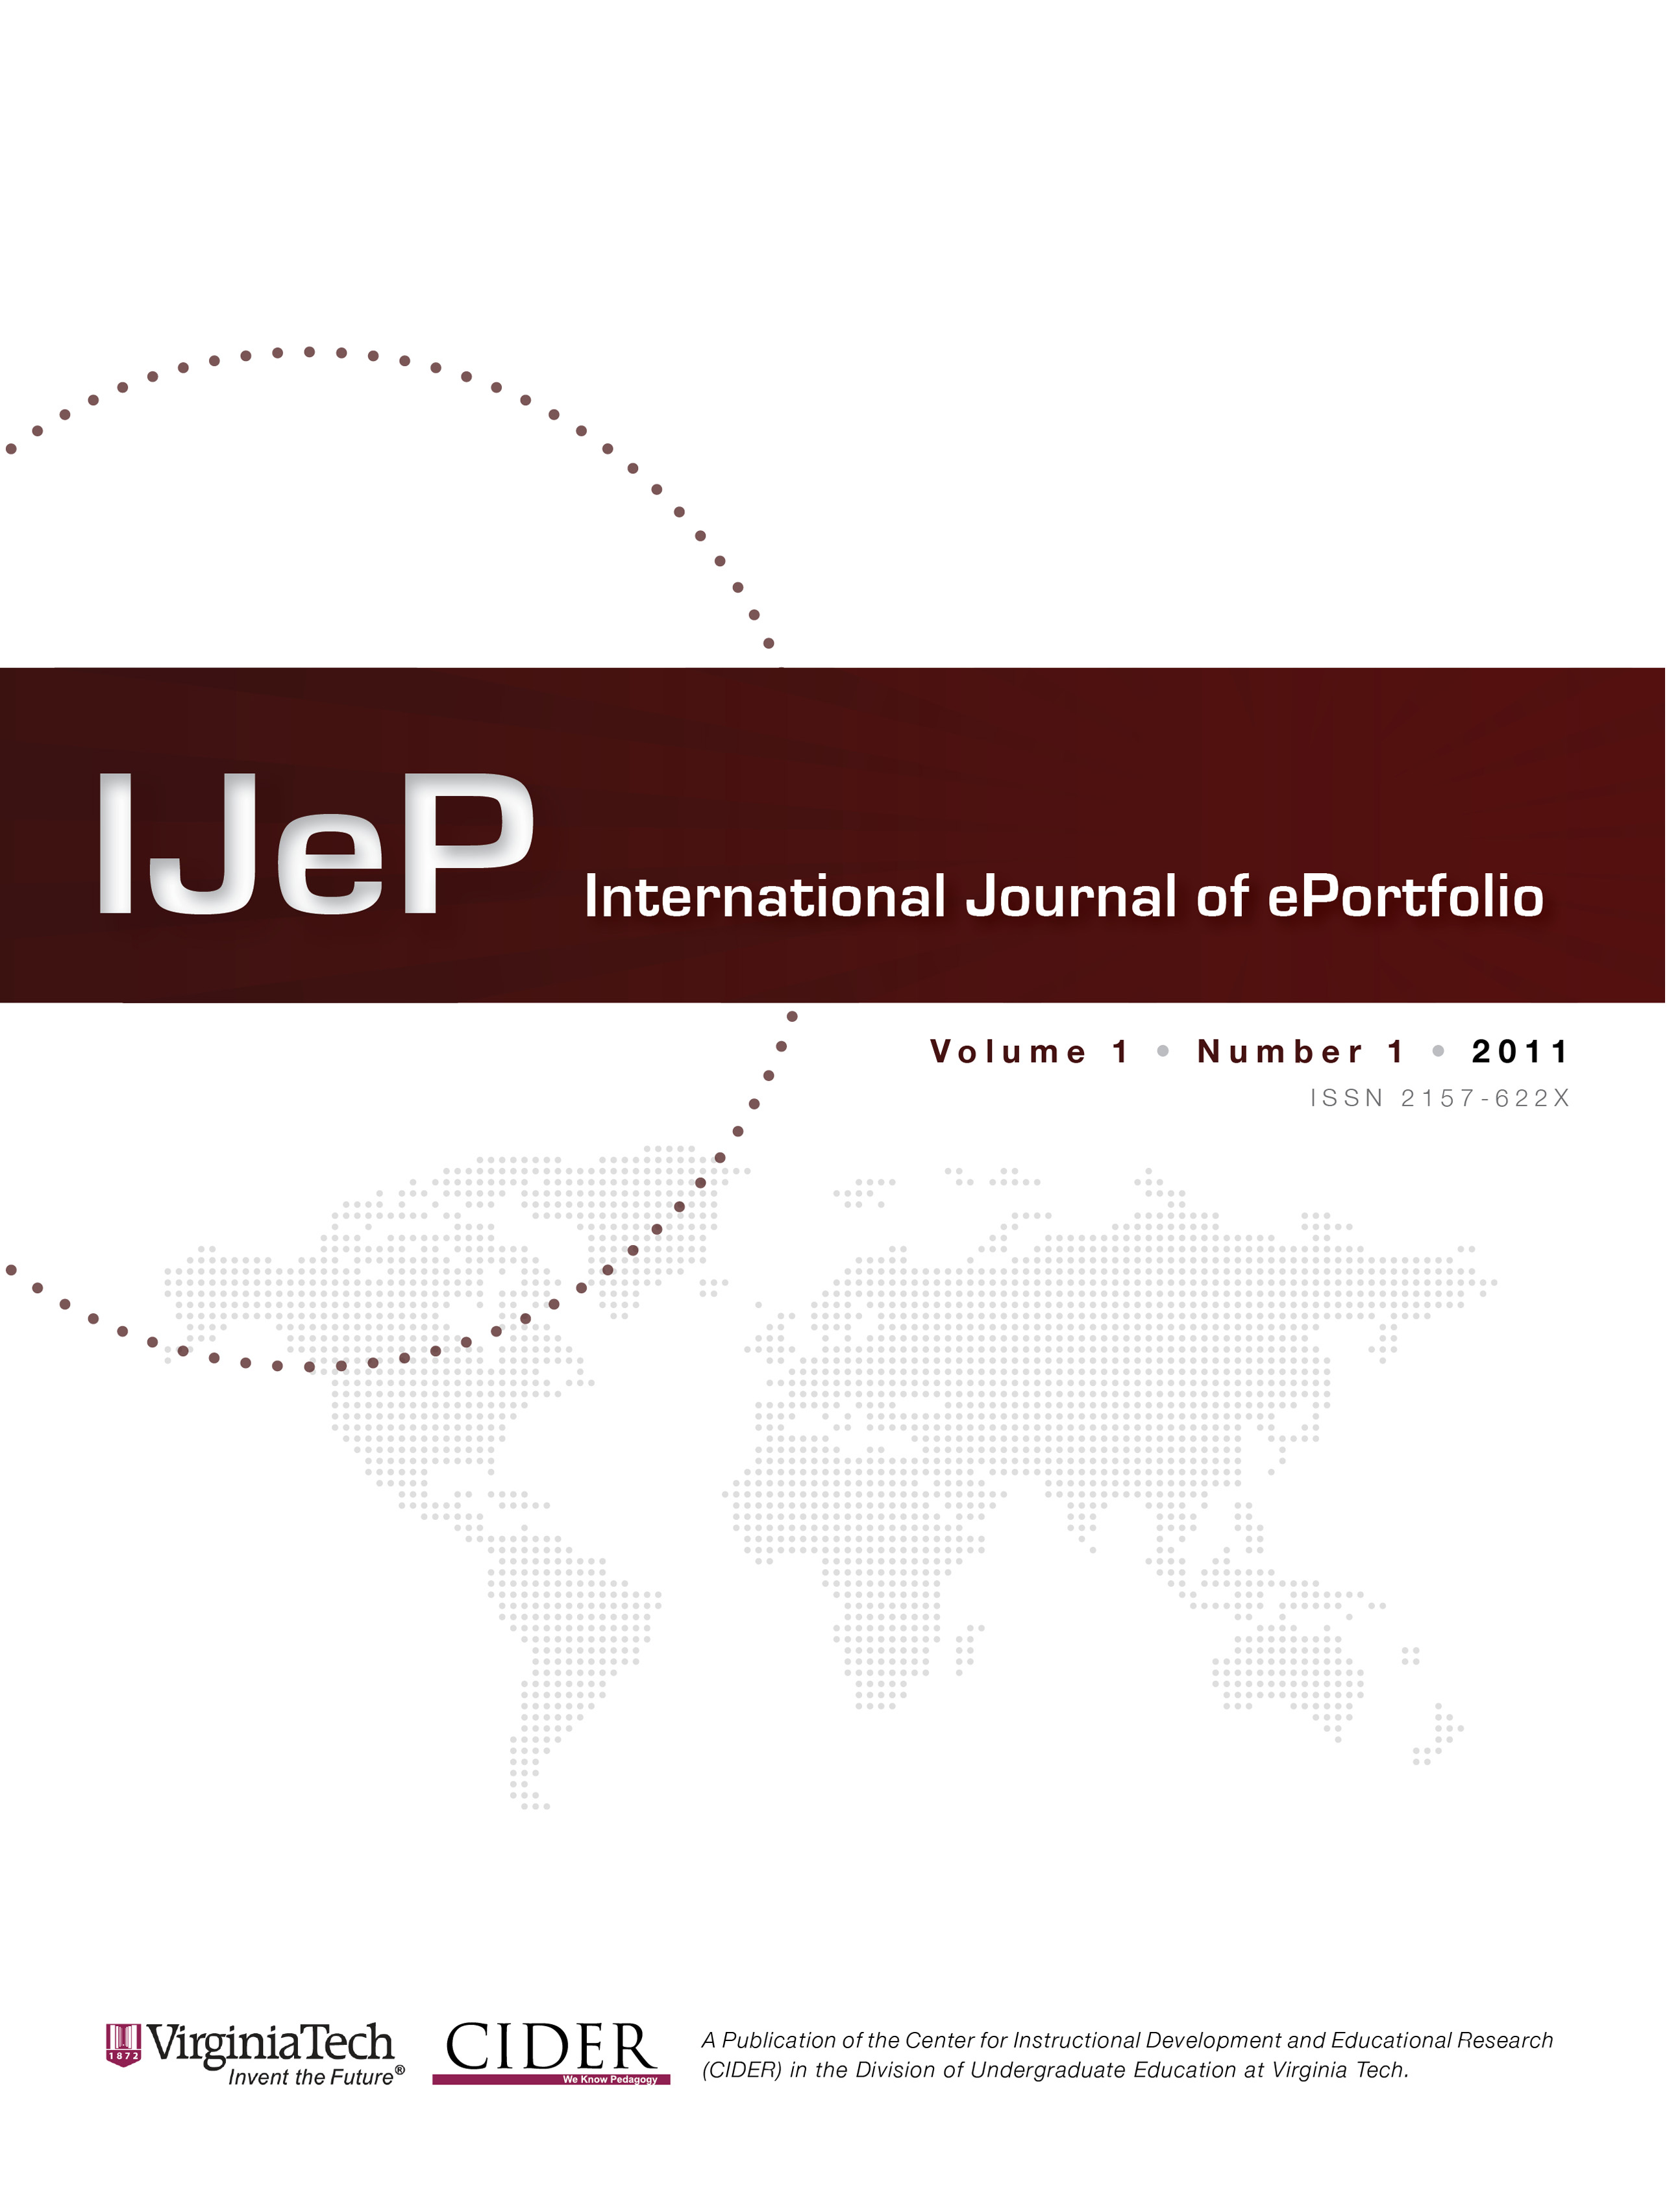 Cover of Inaugural Issue of International Journal of ePortfolio